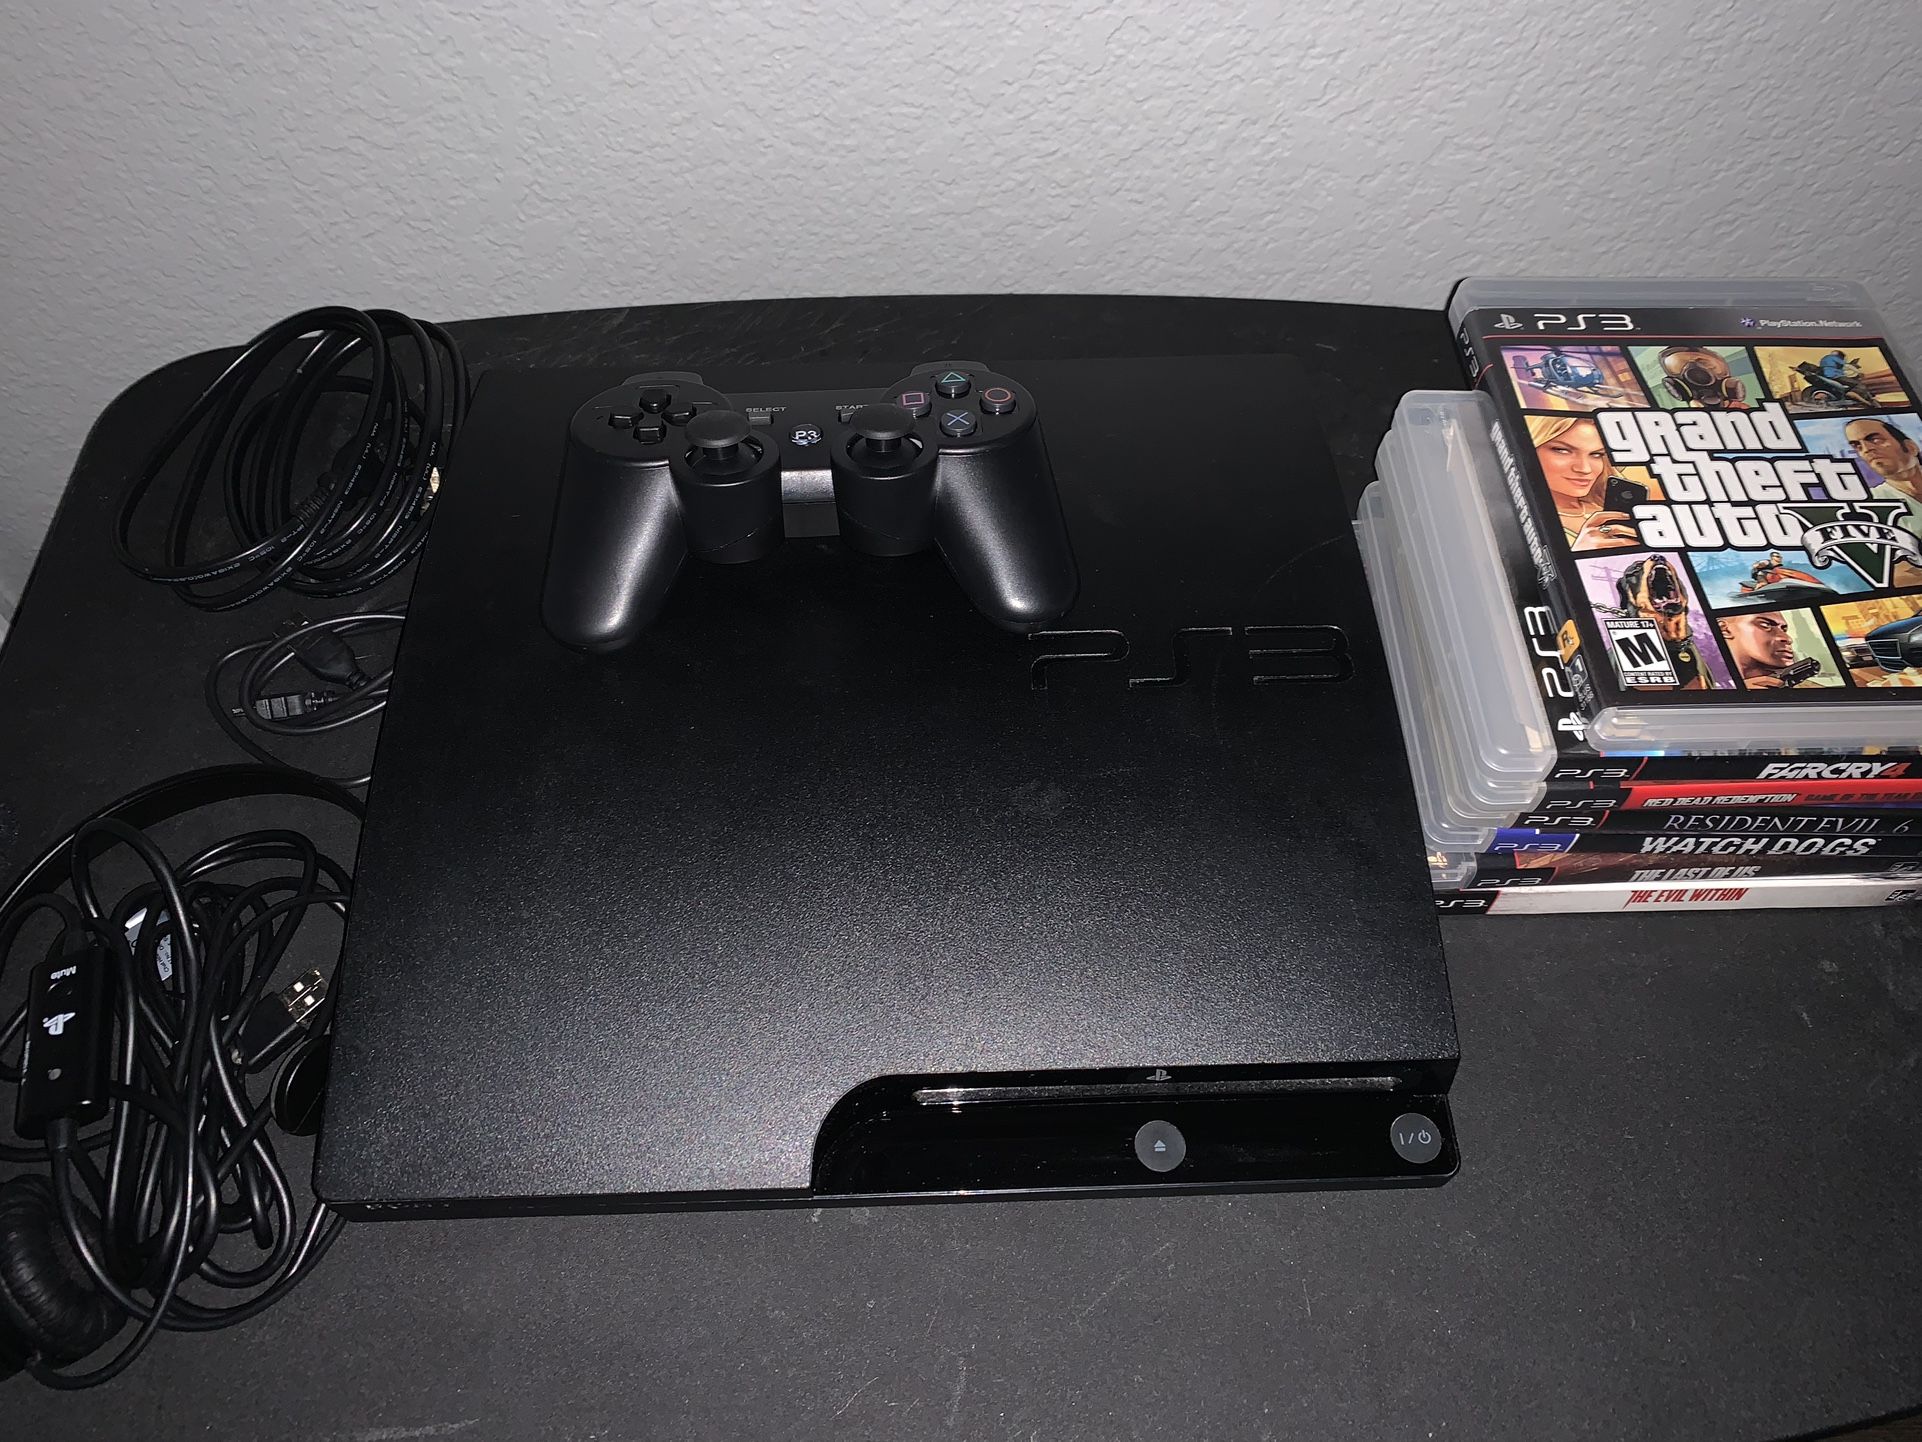 PS3 With 7 Games 